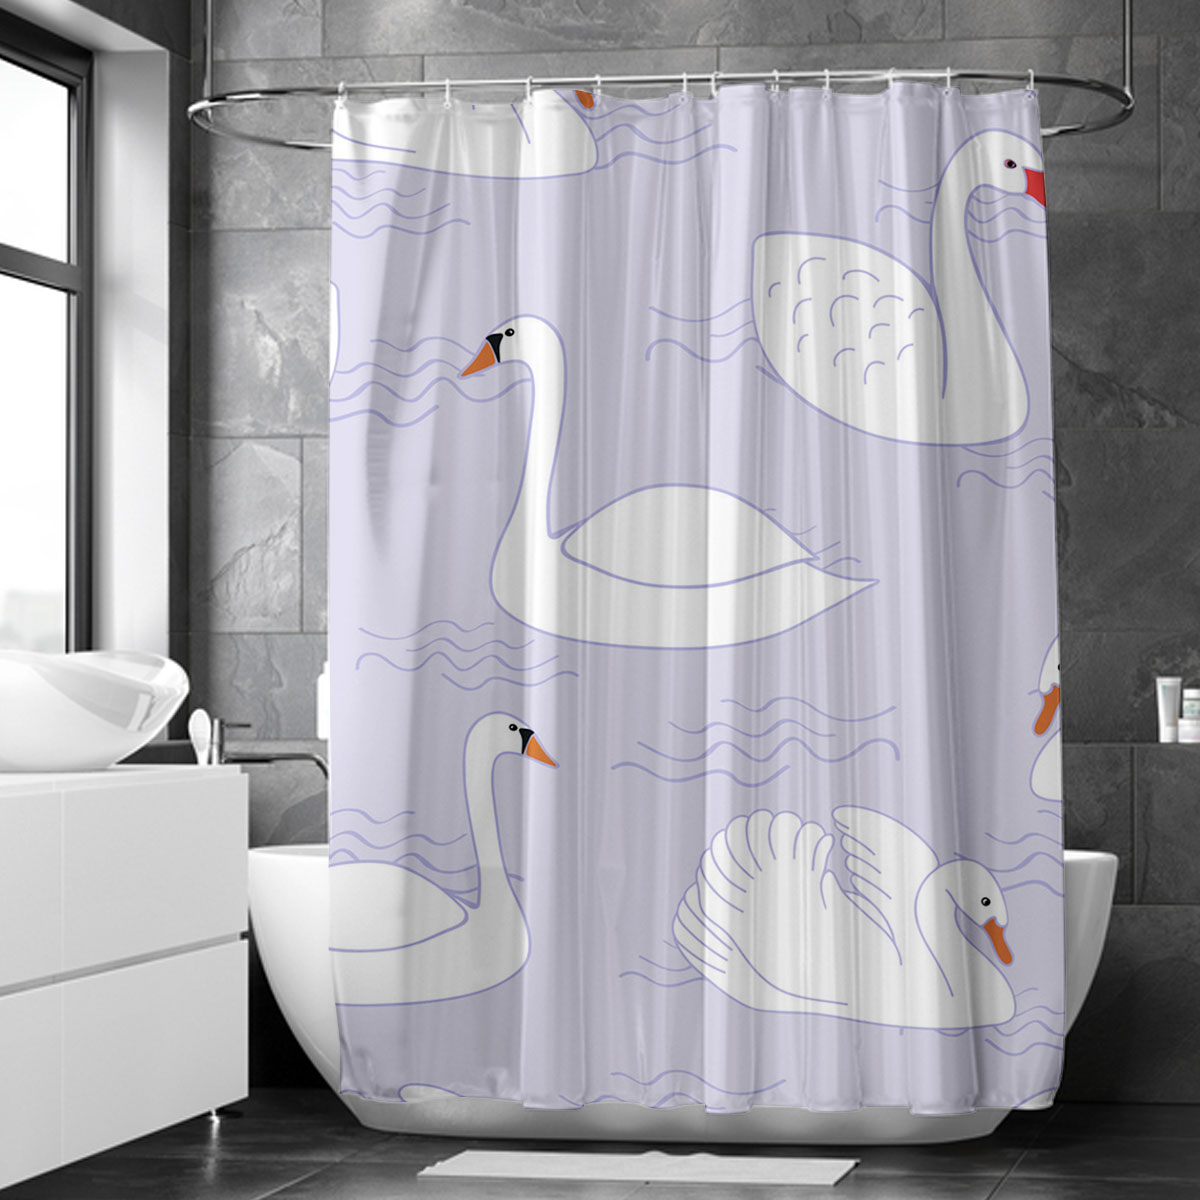 Floating White Swan Shower Curtain